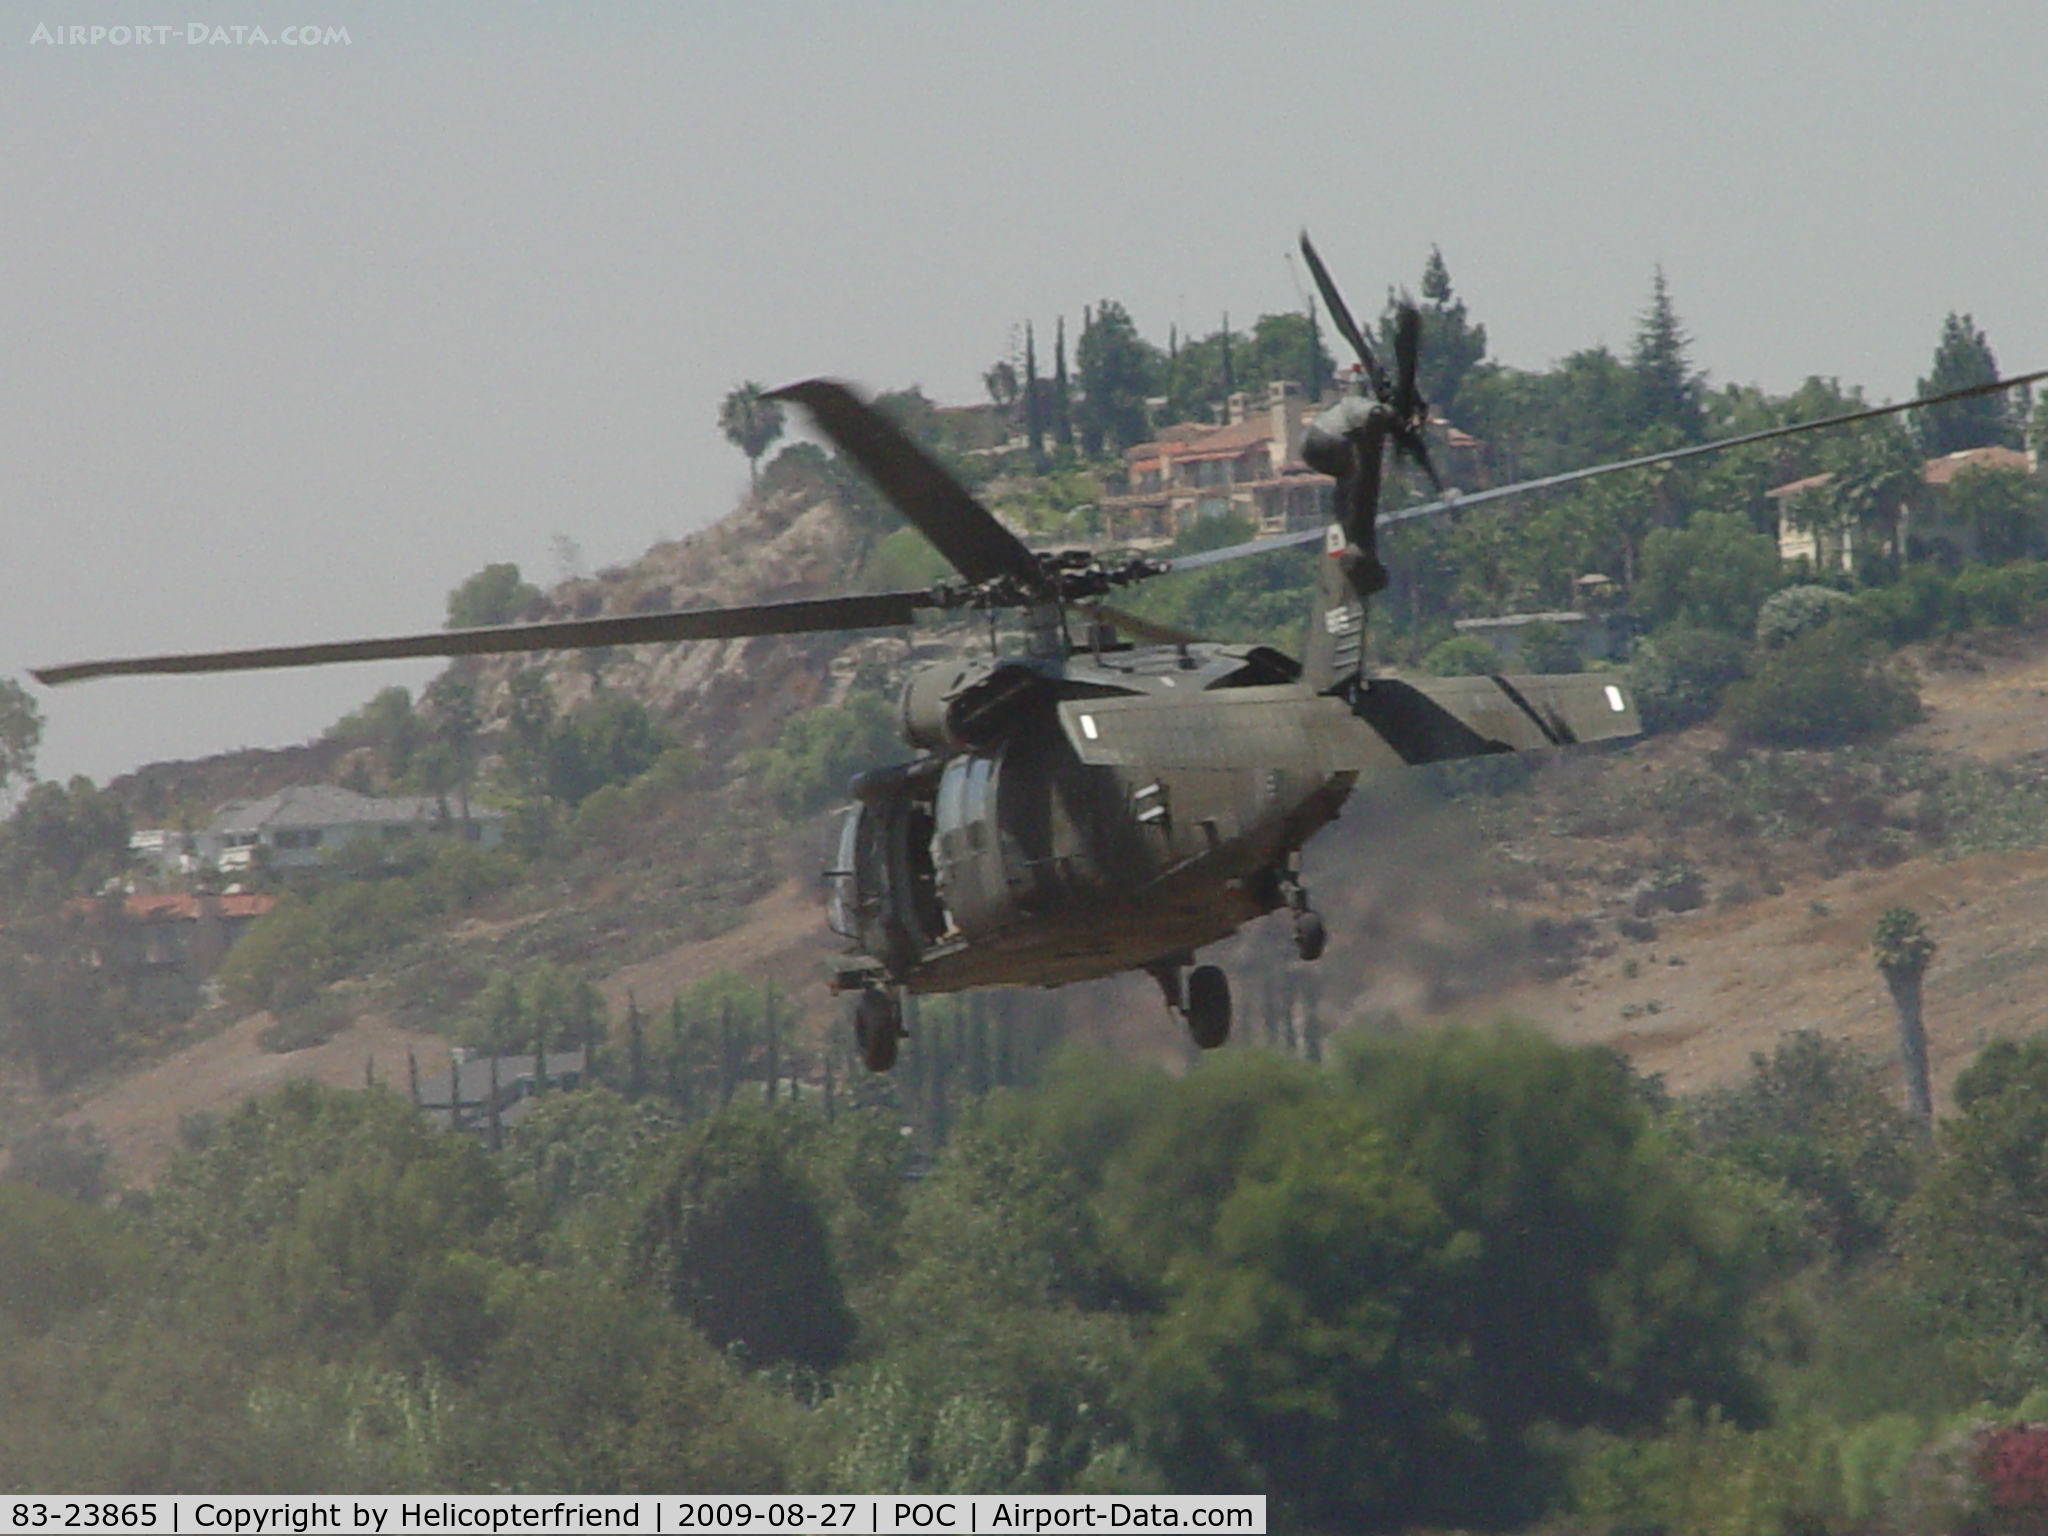 83-23865, 1983 Sikorsky UH-60A Black Hawk C/N 70690, Lift off and headed westbound